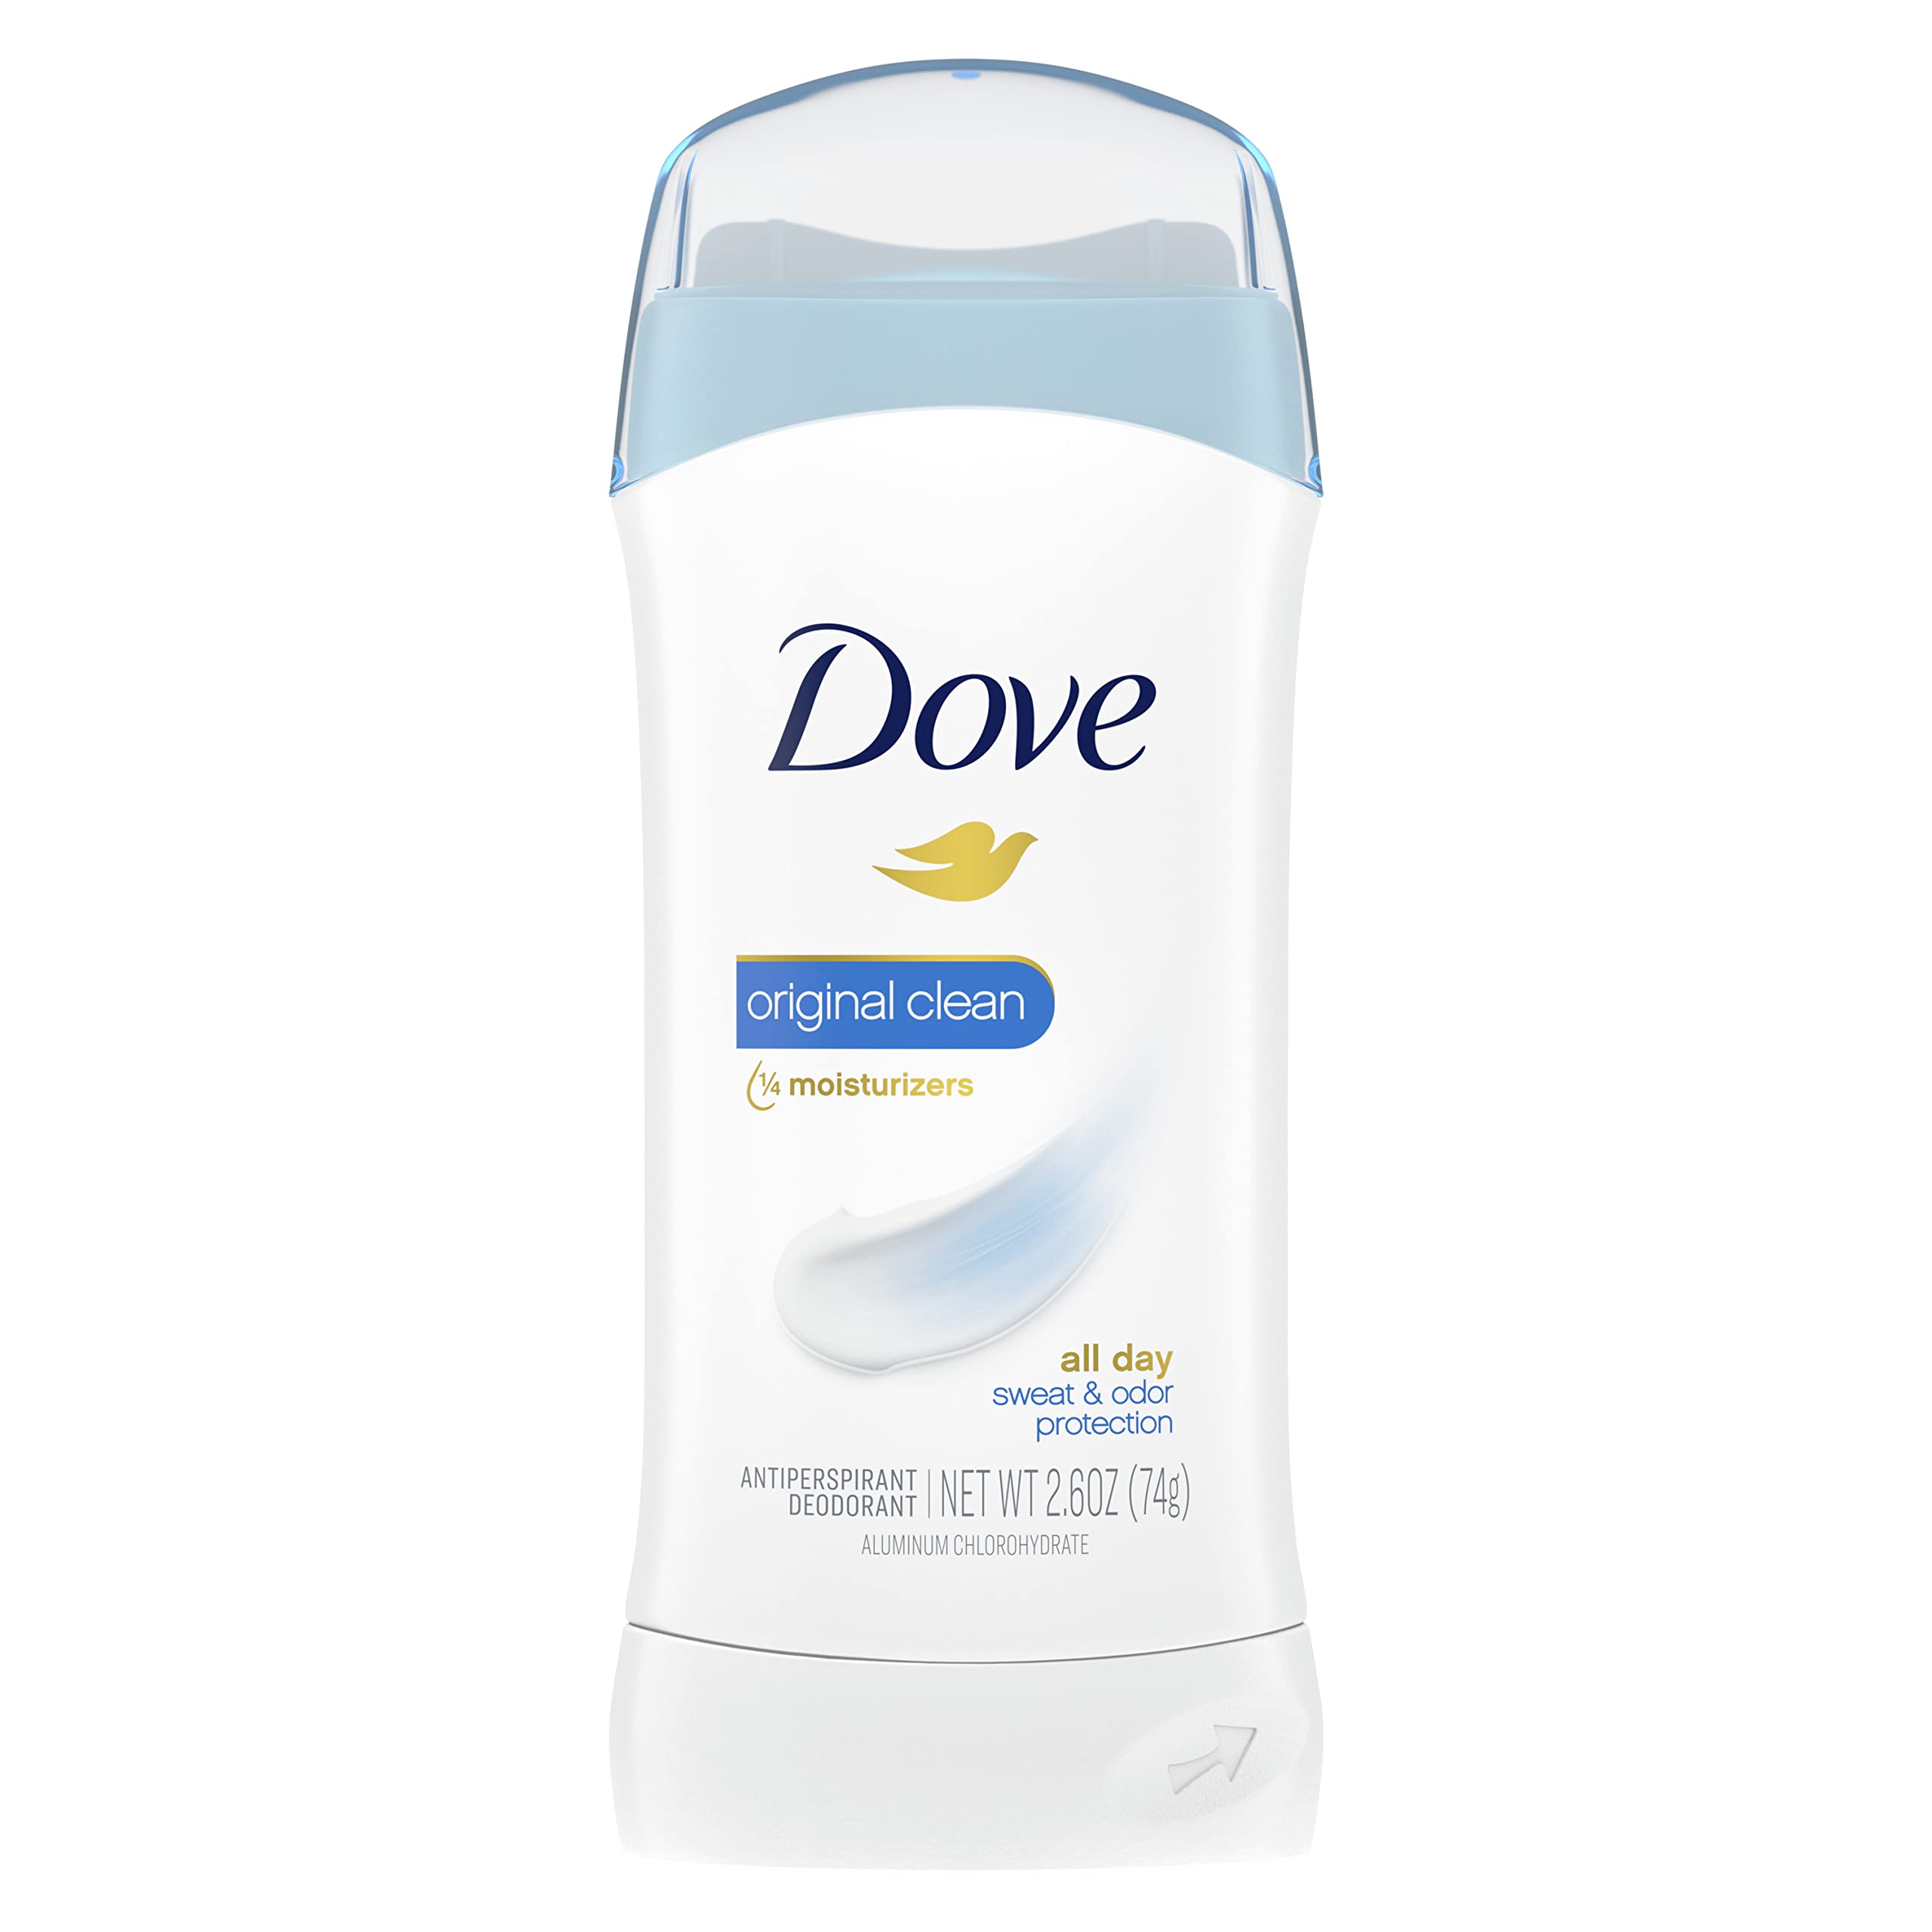 Dove Invisible Solid Antiperspirant Deodorant Stick for Women, Original Clean, For All Day Underarm Sweat & Odor Protection 2.6 oz